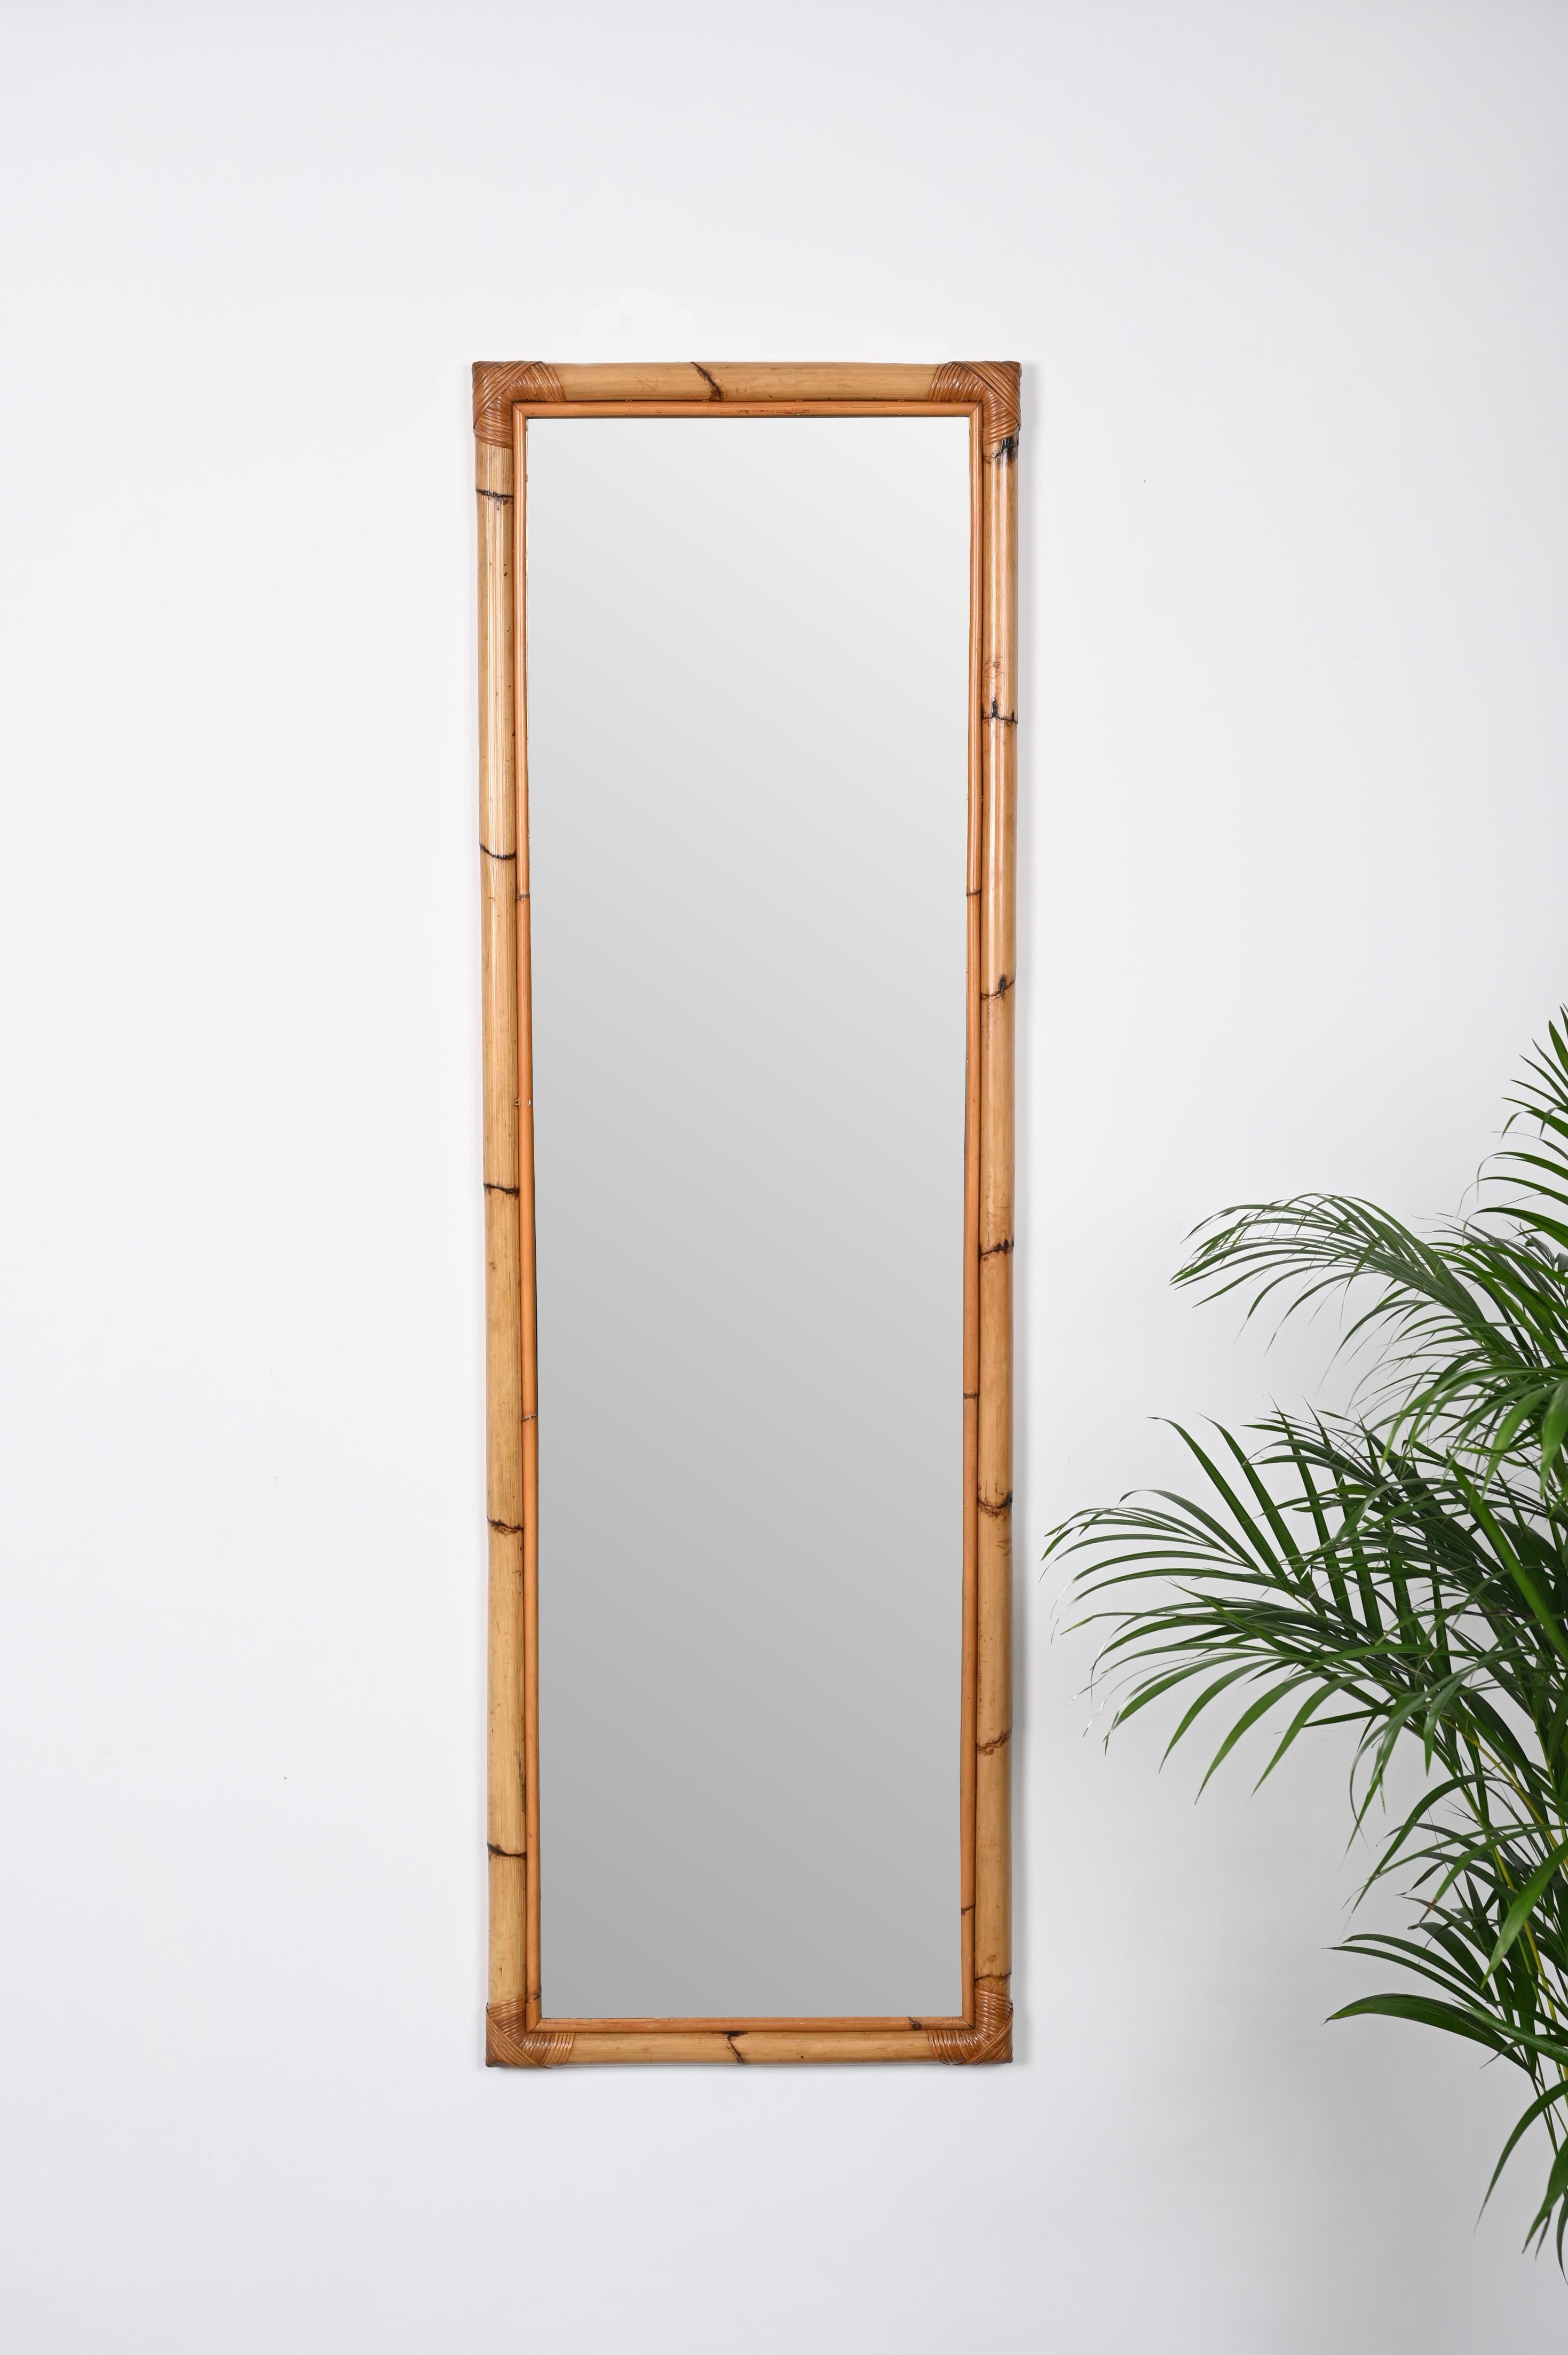 Midcentury Rectangular Mirror with Bamboo and Rattan Frame, Italy, 1970s For Sale 3